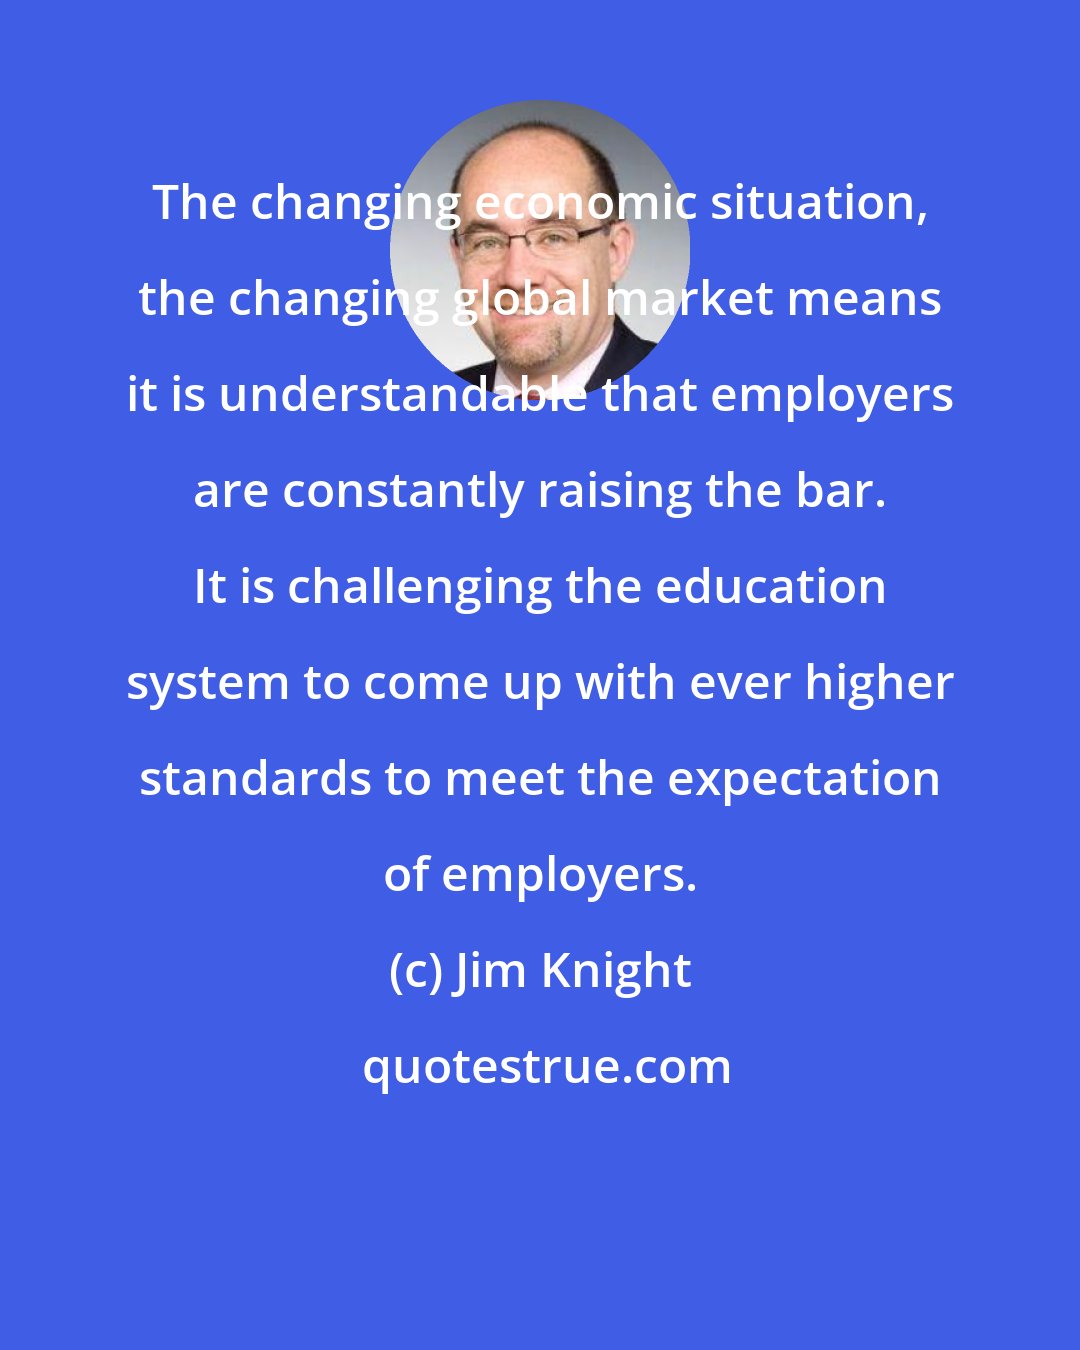 Jim Knight: The changing economic situation, the changing global market means it is understandable that employers are constantly raising the bar. It is challenging the education system to come up with ever higher standards to meet the expectation of employers.